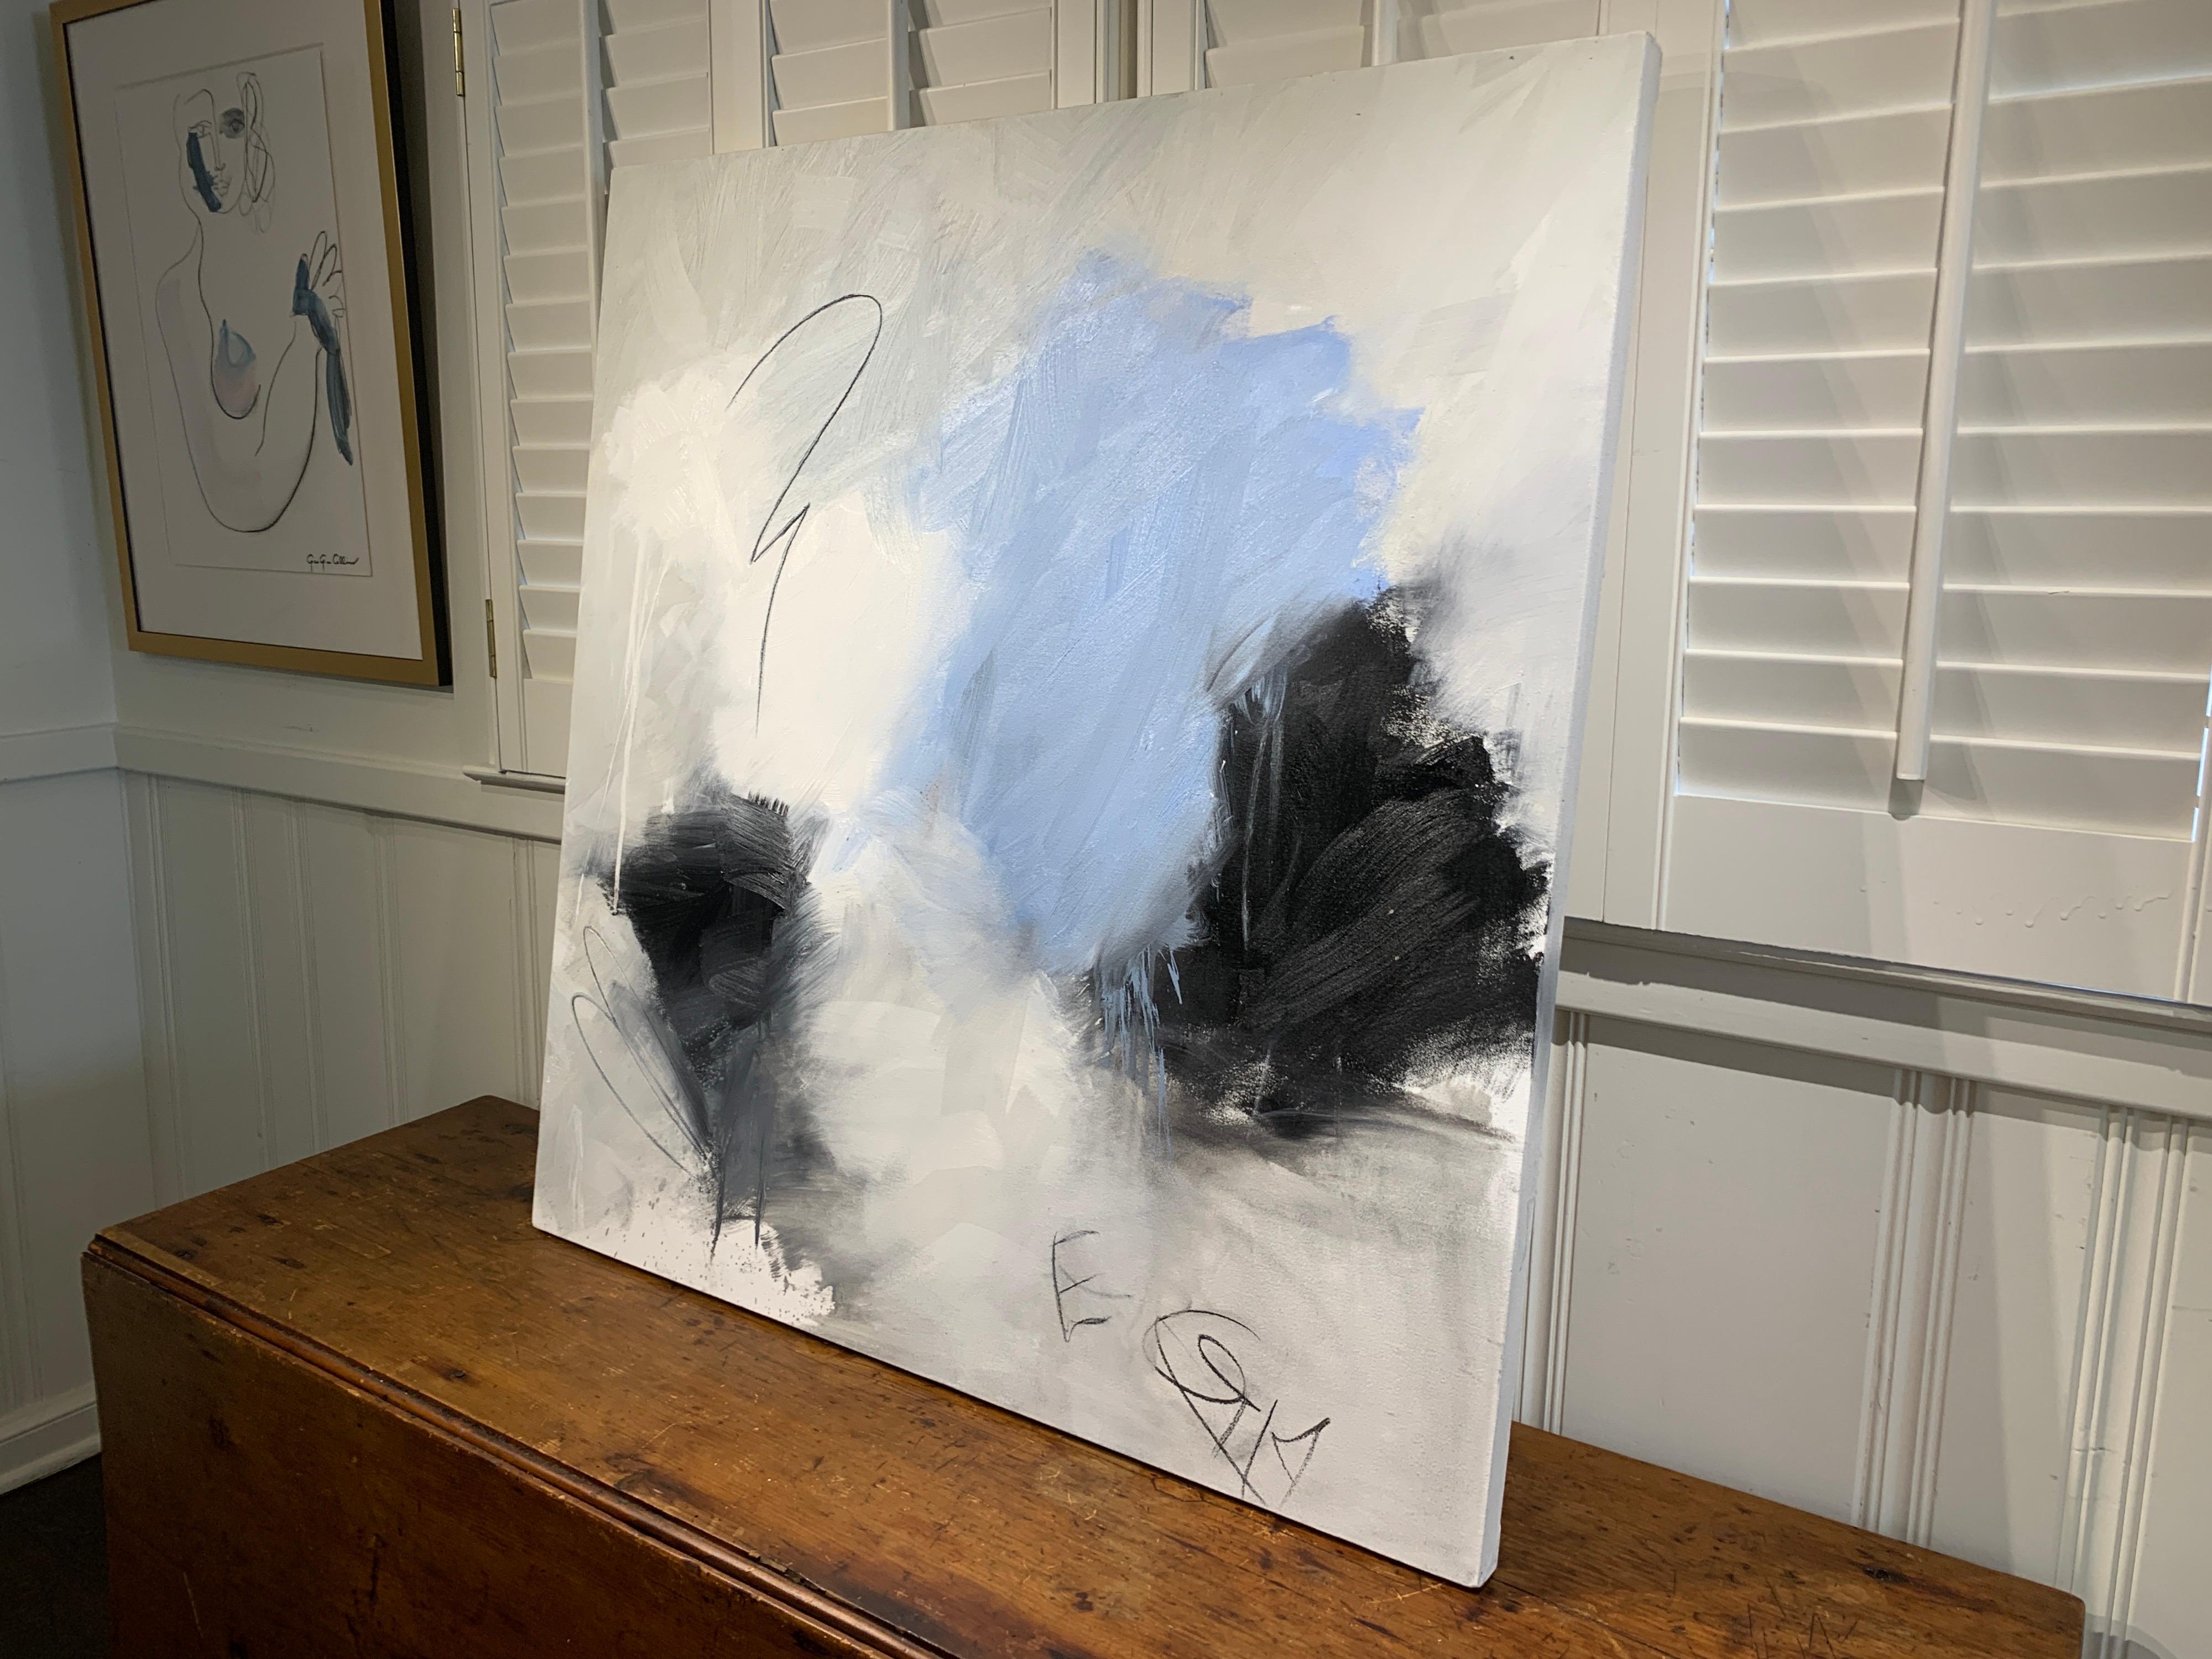 Judy Hintz Cox's wonderfully abstract paintings are a symphony in simplicity. Spare brush strokes work in tandem with Judy's heavily textured canvases to create beautiful tone-on-tone paintings. Her multi-media paintings go far beyond traditional